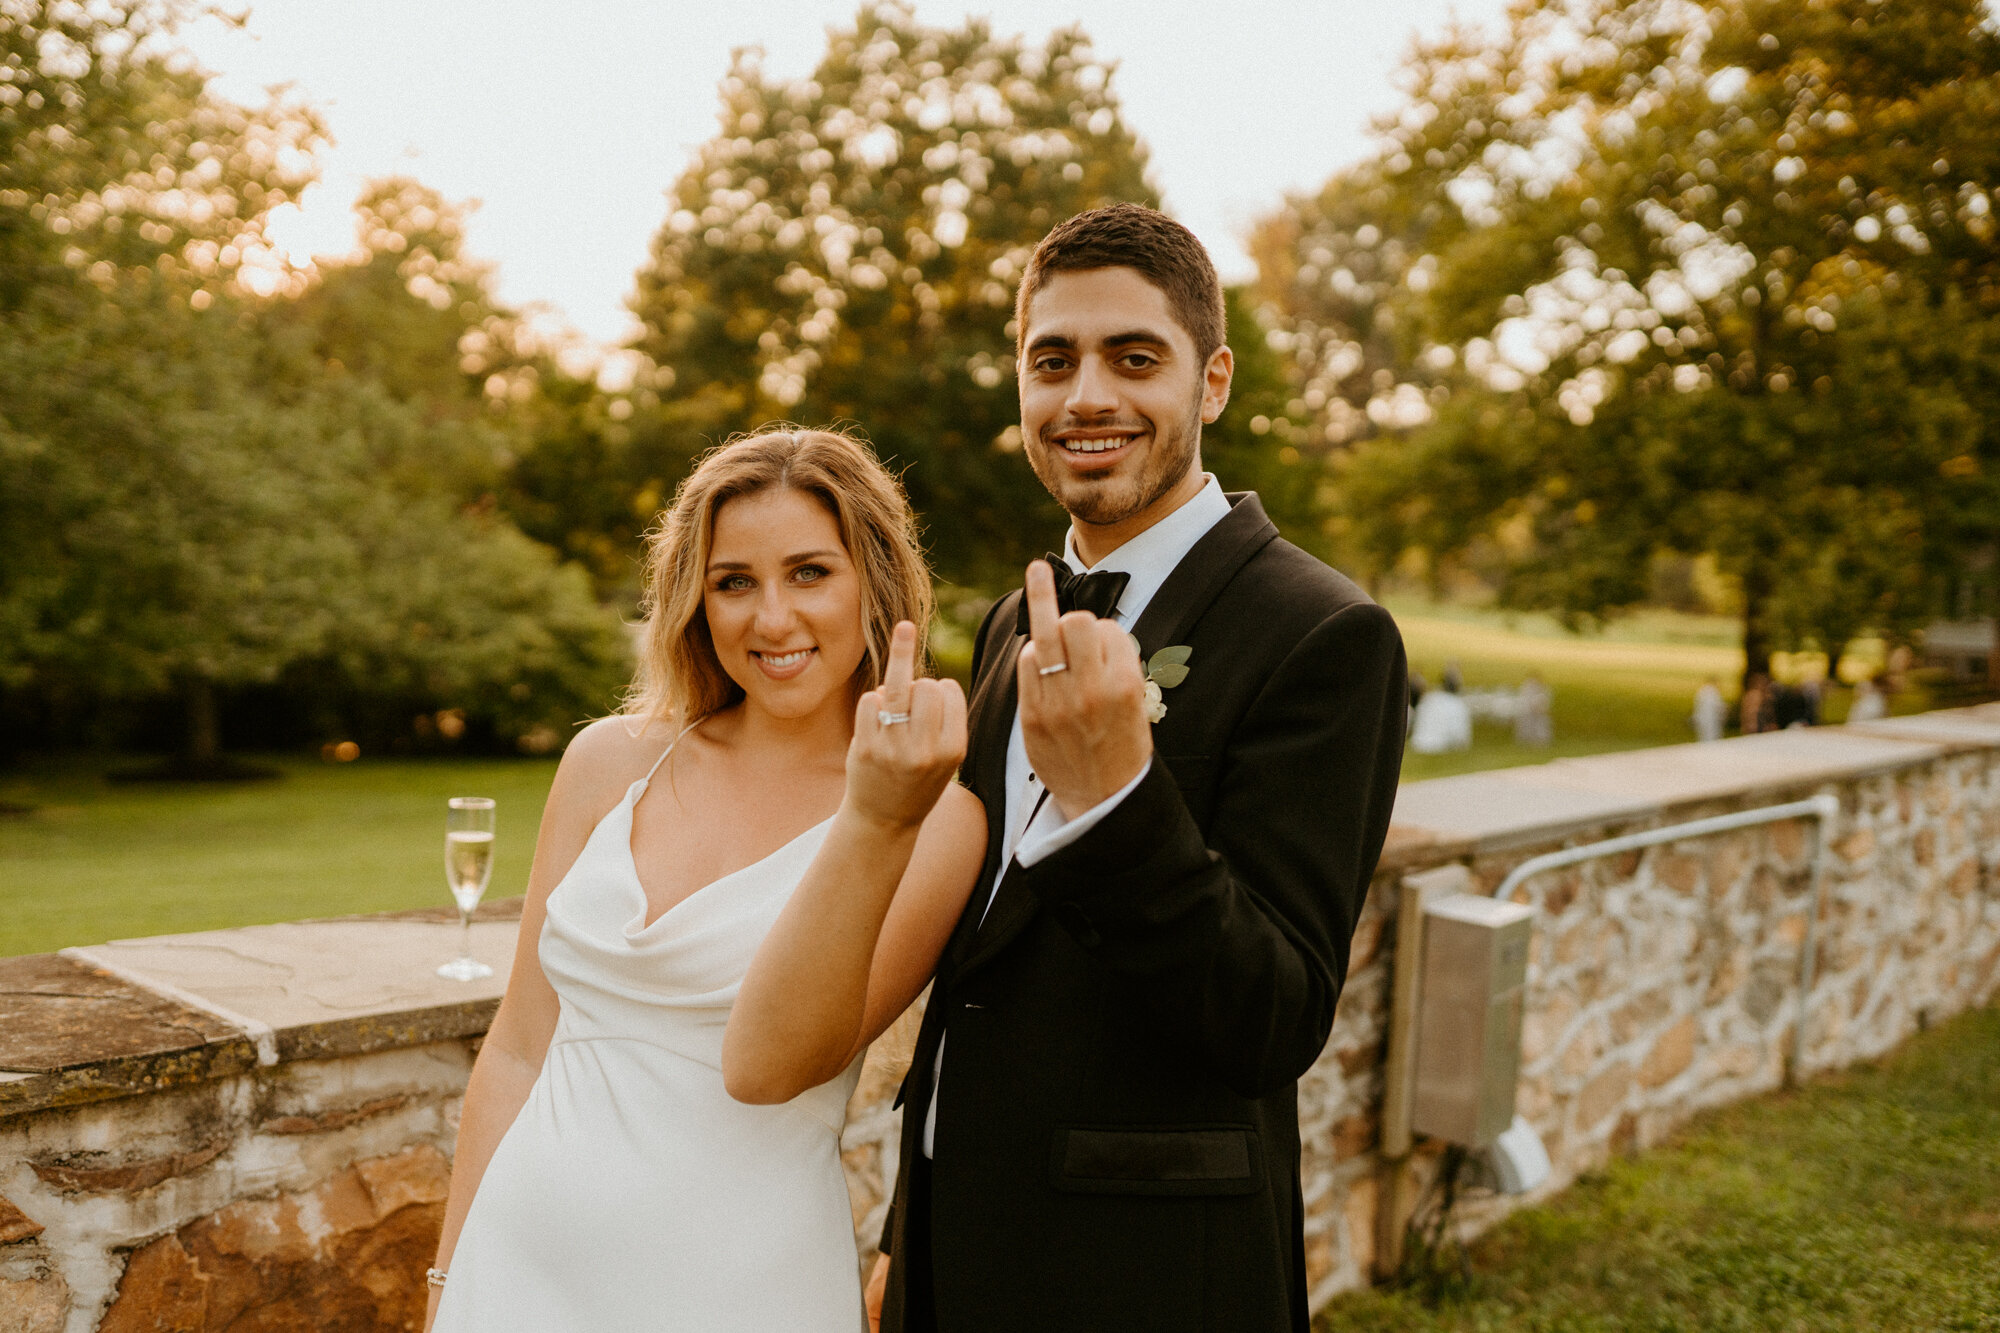 bride and groom holding up ring fingers